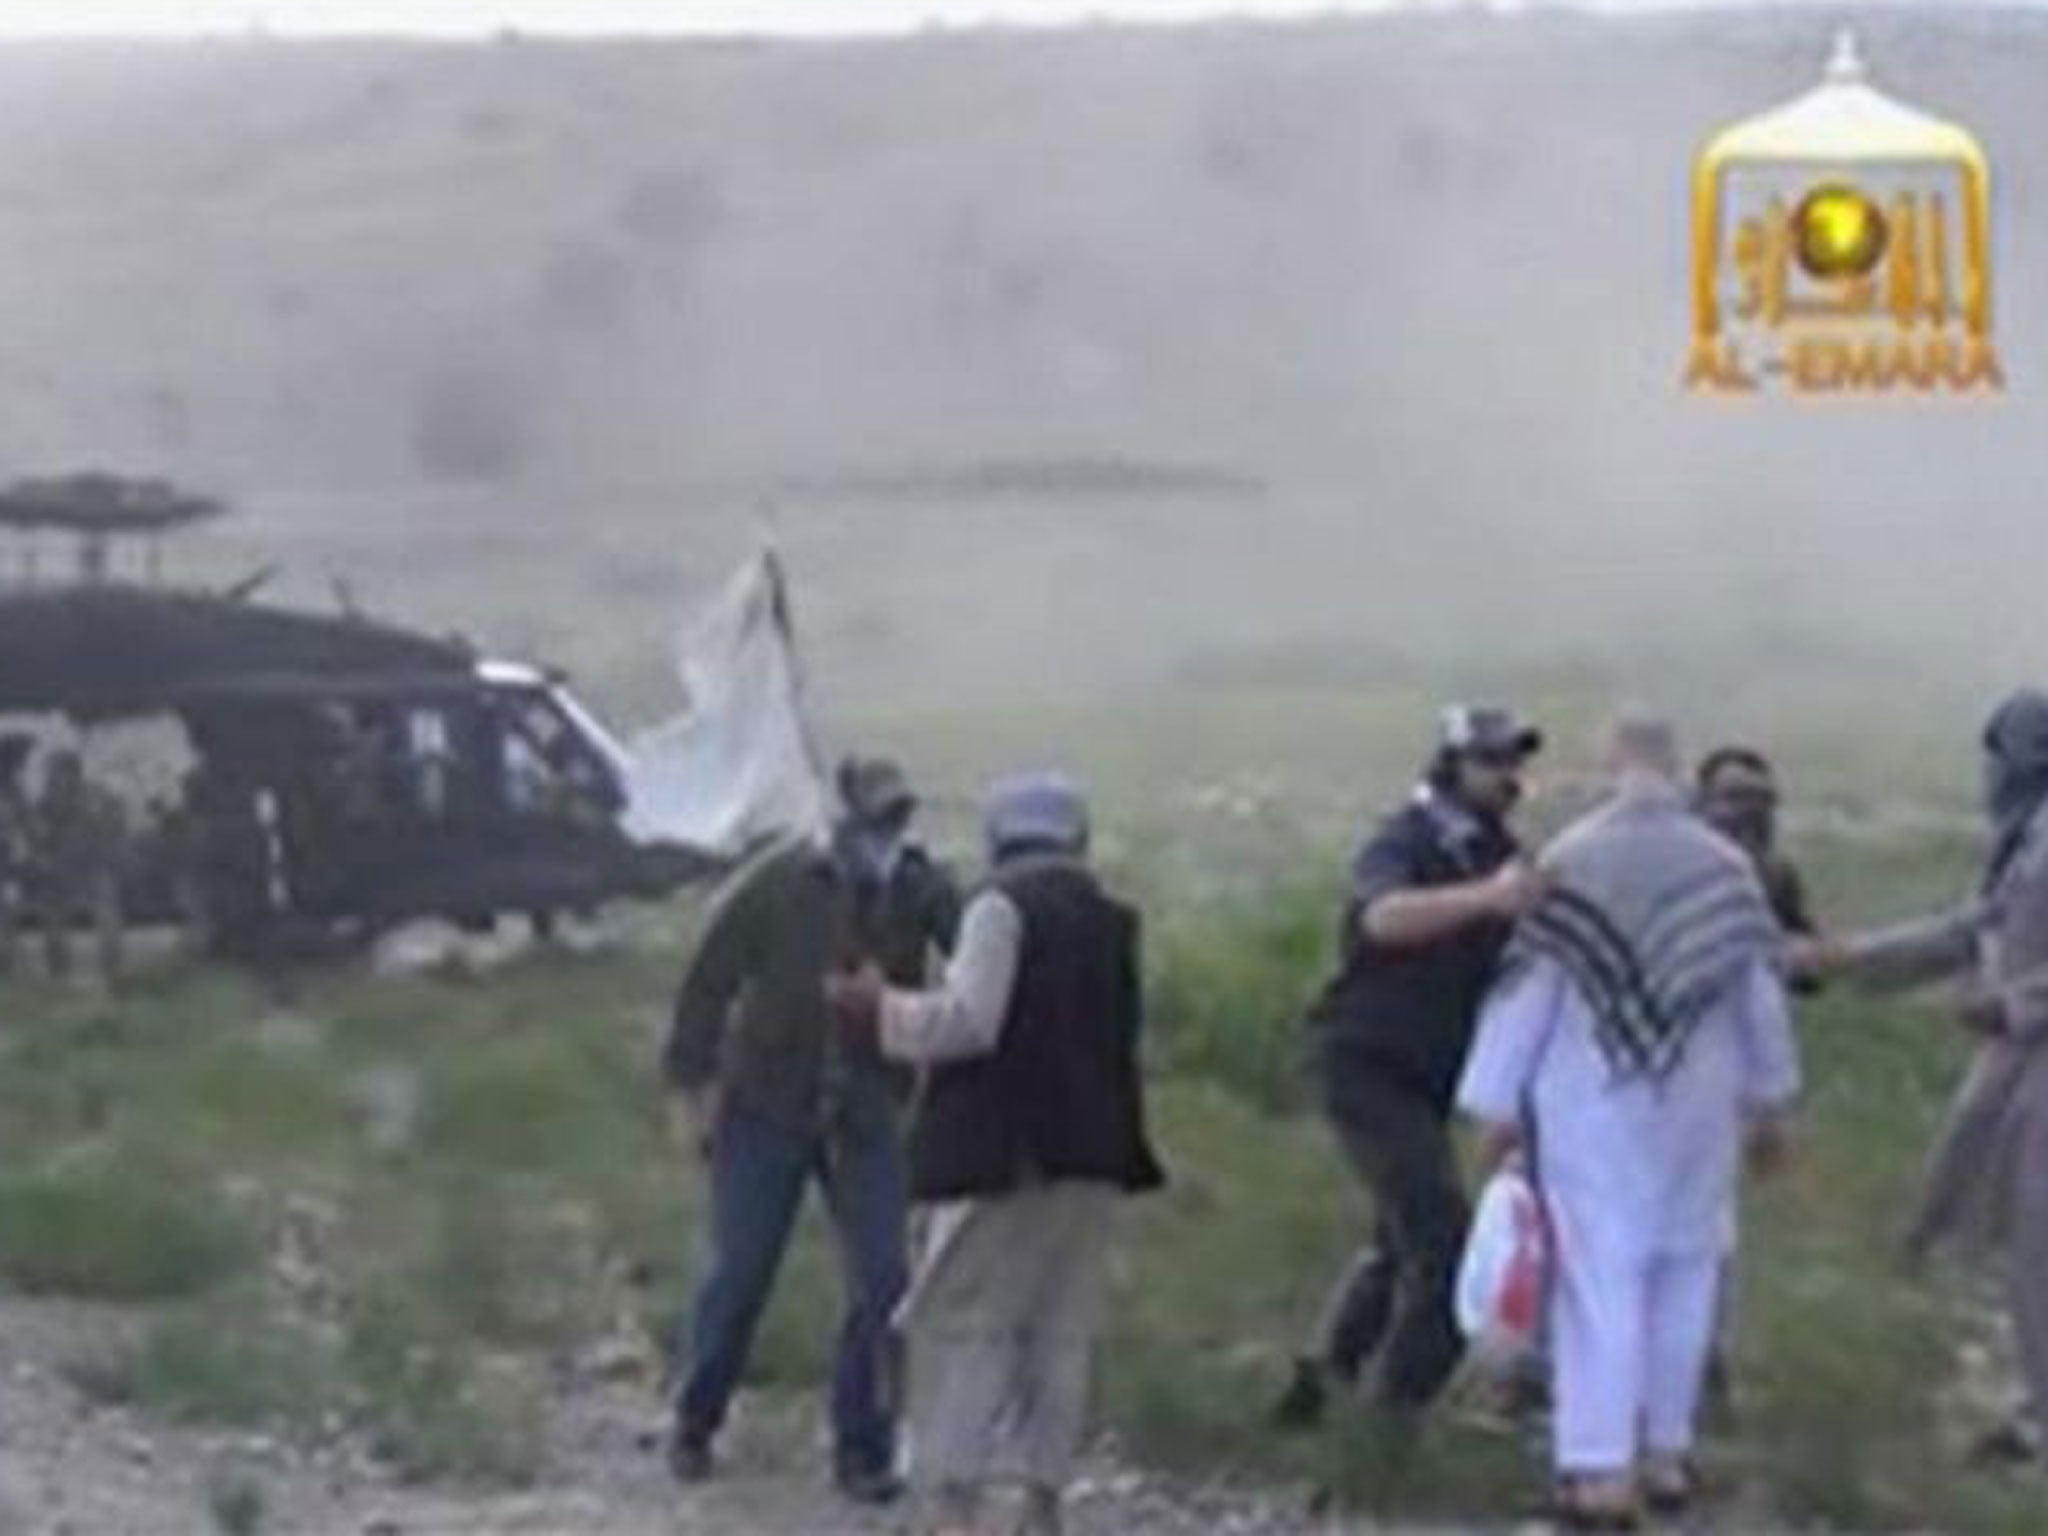 The Taliban has released a video showing the handover of Sergeant Bowe Bergdahl to US Special Forces in eastern Afghanistan, in a smooth exchange that took place in just ten careful seconds